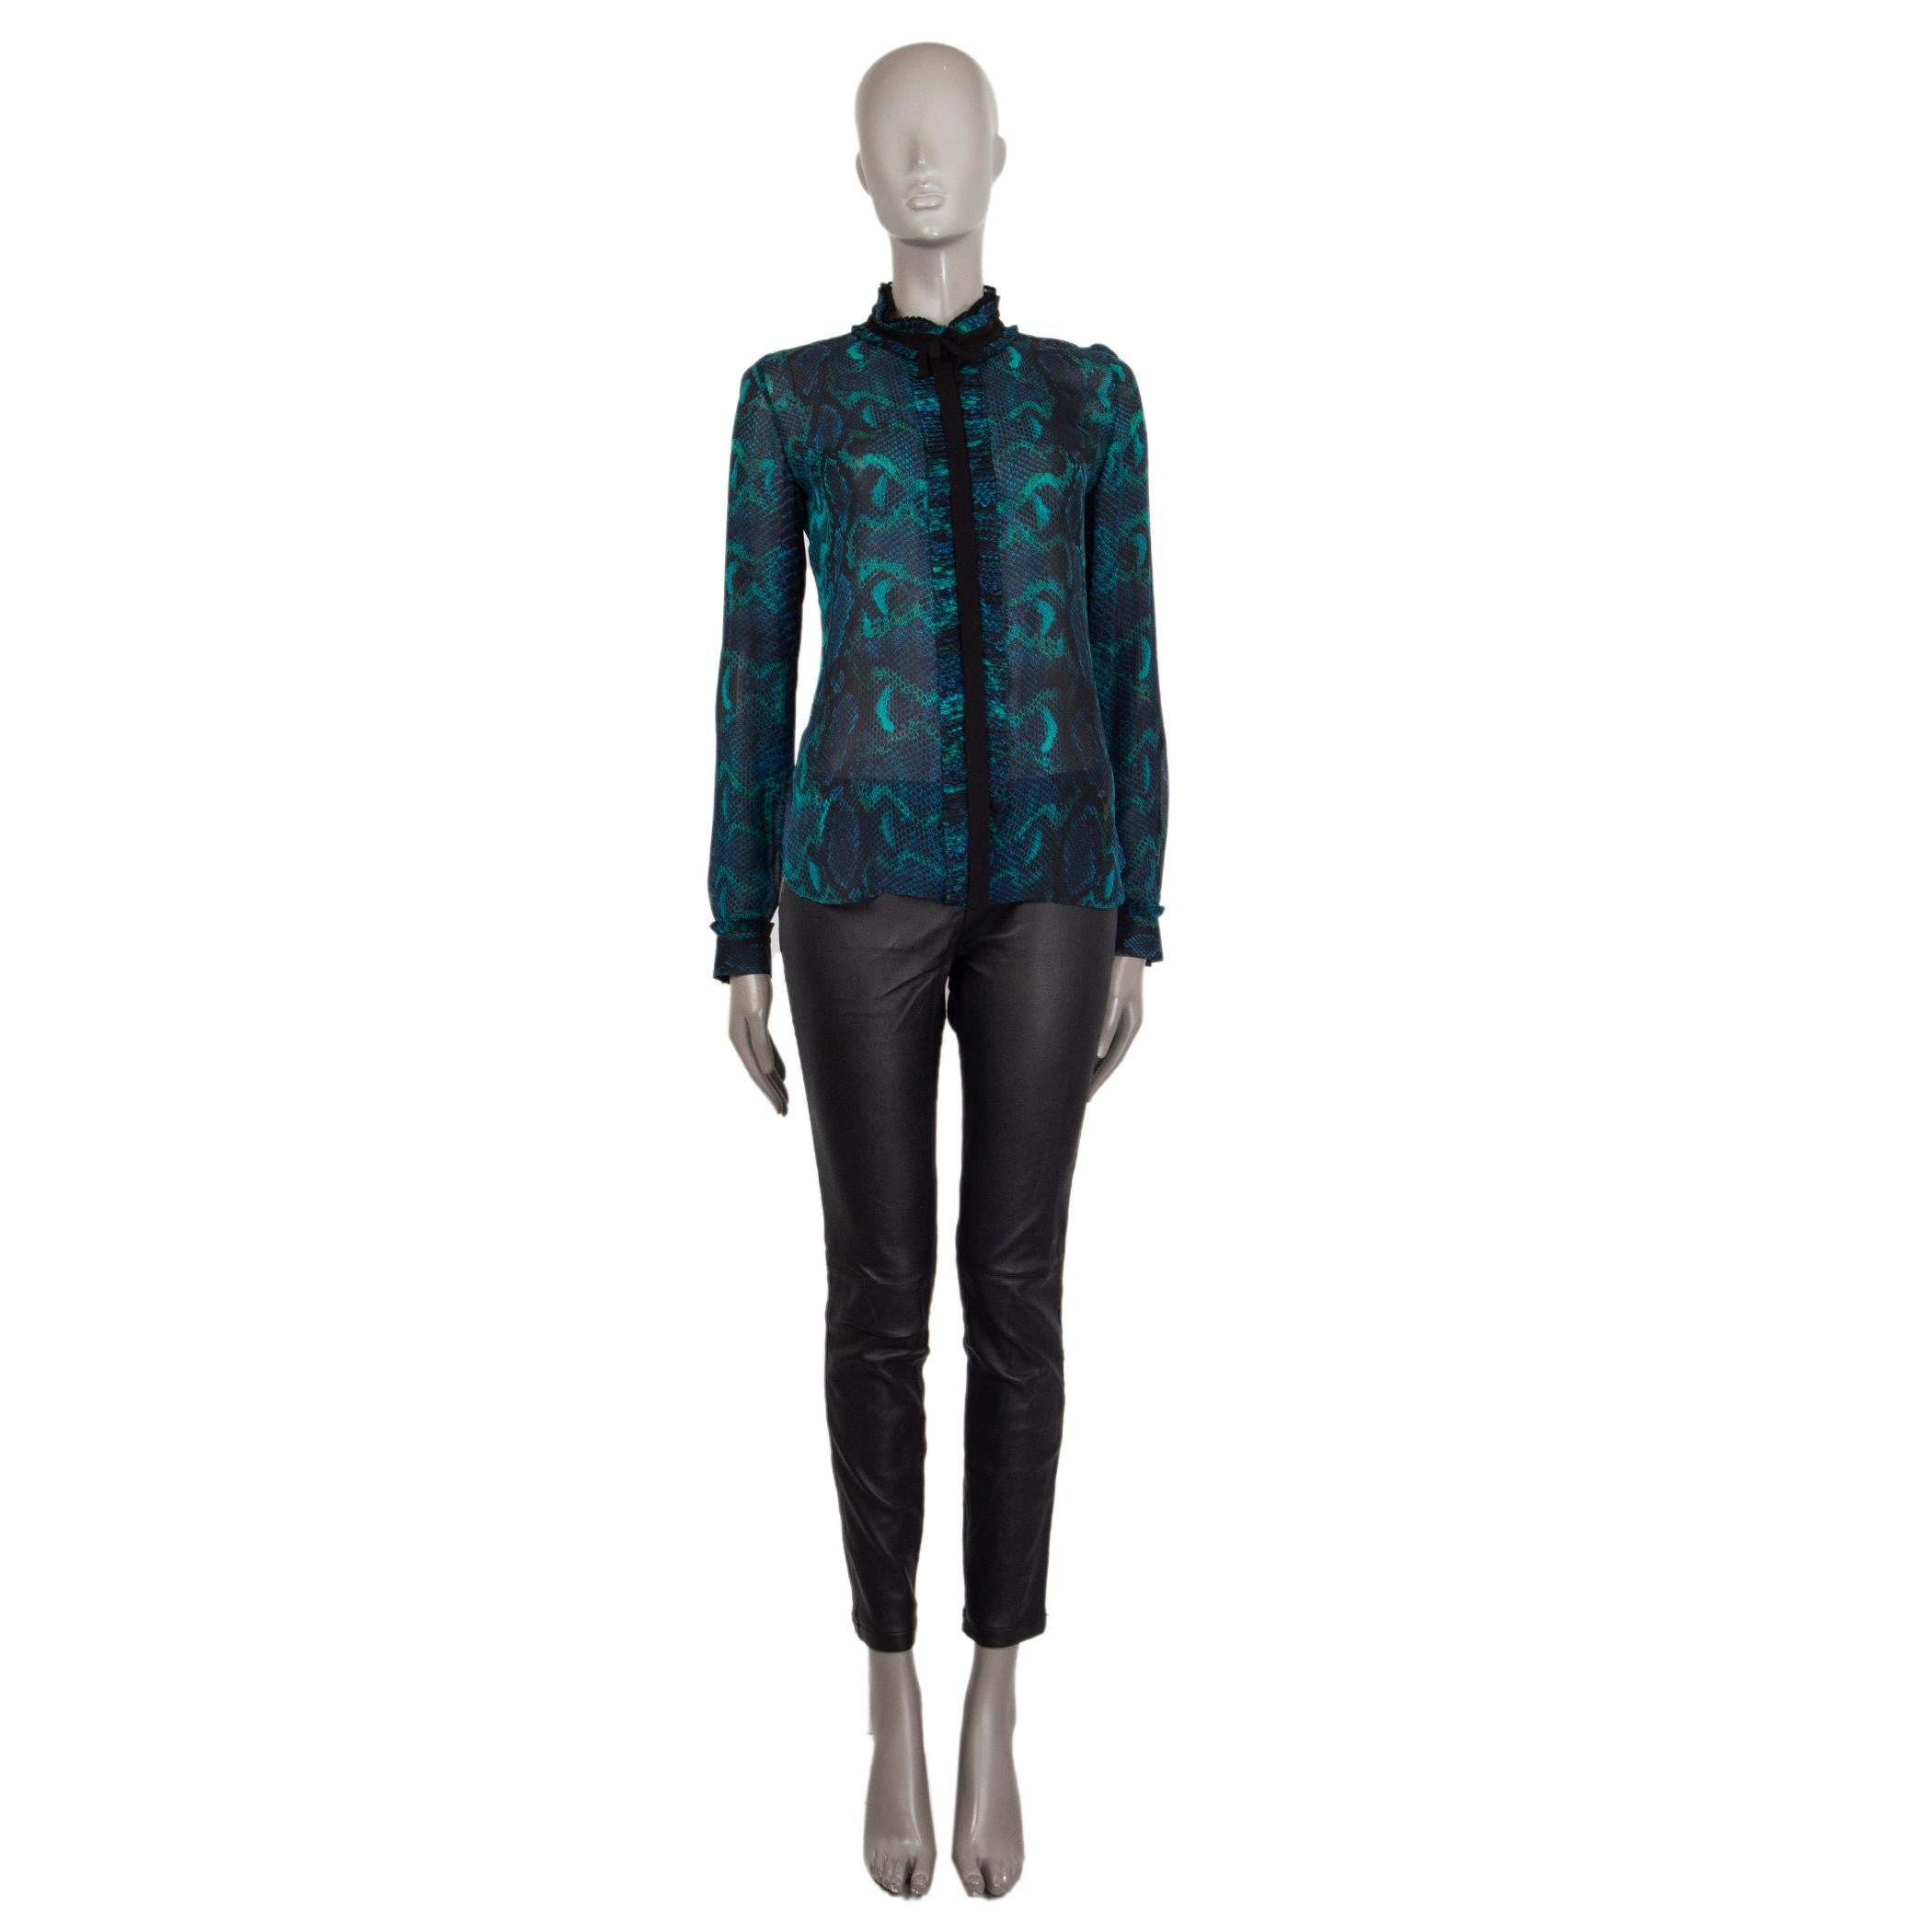 100% authentic Roberto Cavalli, pleated, snake print blouse in black, blue and sea foam silk (100%). WIth front panel. Closes with buttons on the front and on cuffs. Has a bowed mock neck. Unlined. Has been worn and is in excellent condition.